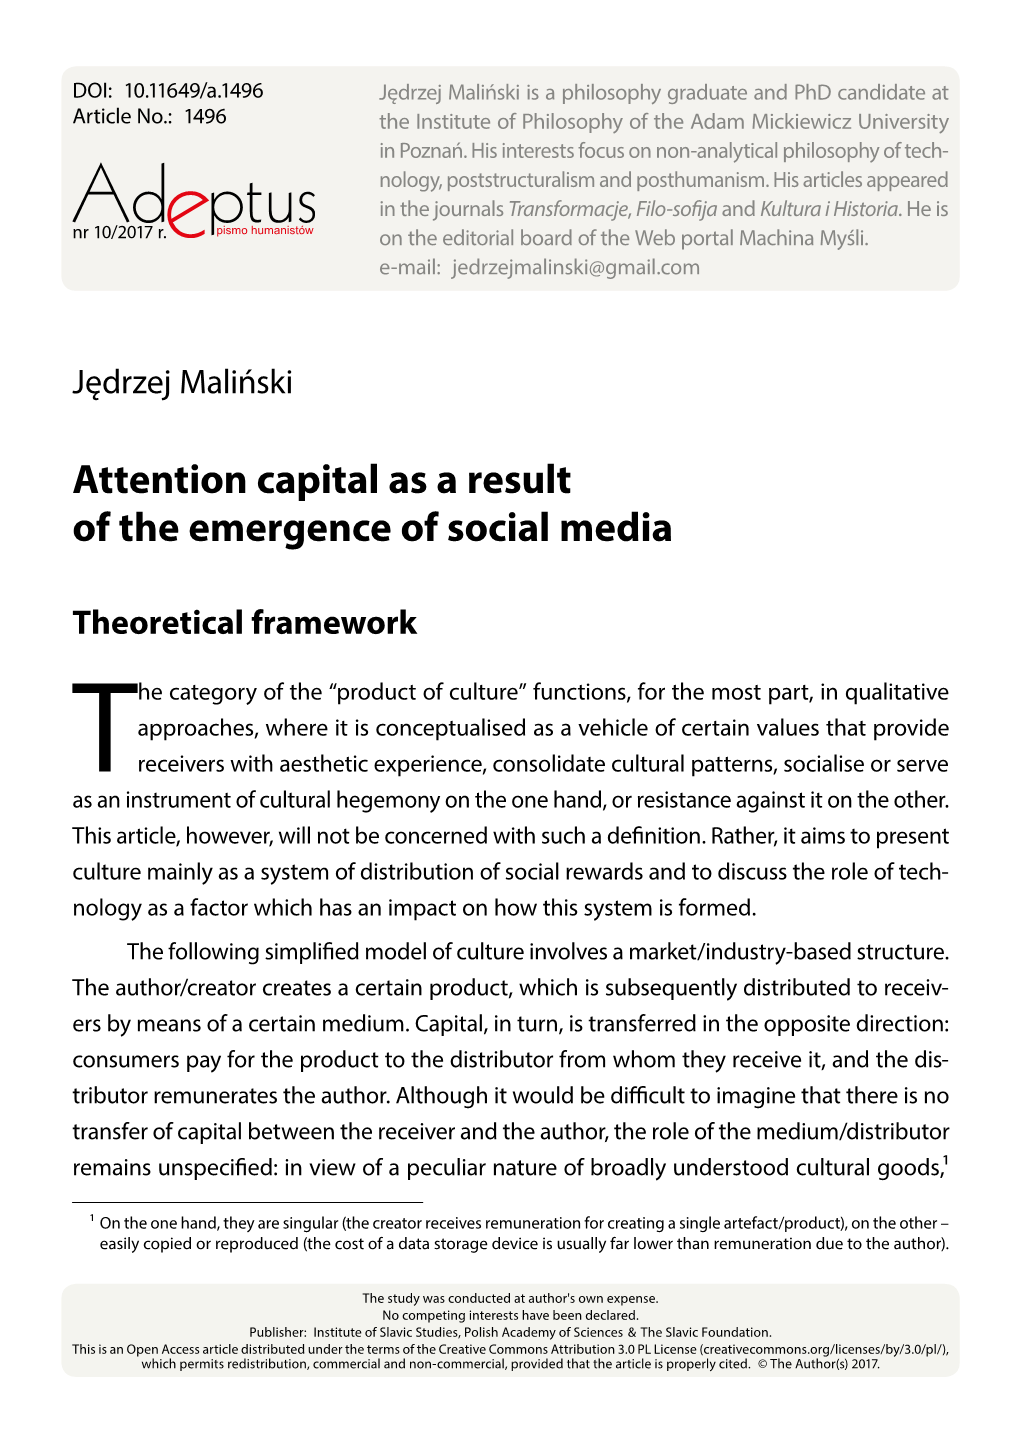 Attention Capital As a Result of the Emergence of Social Media